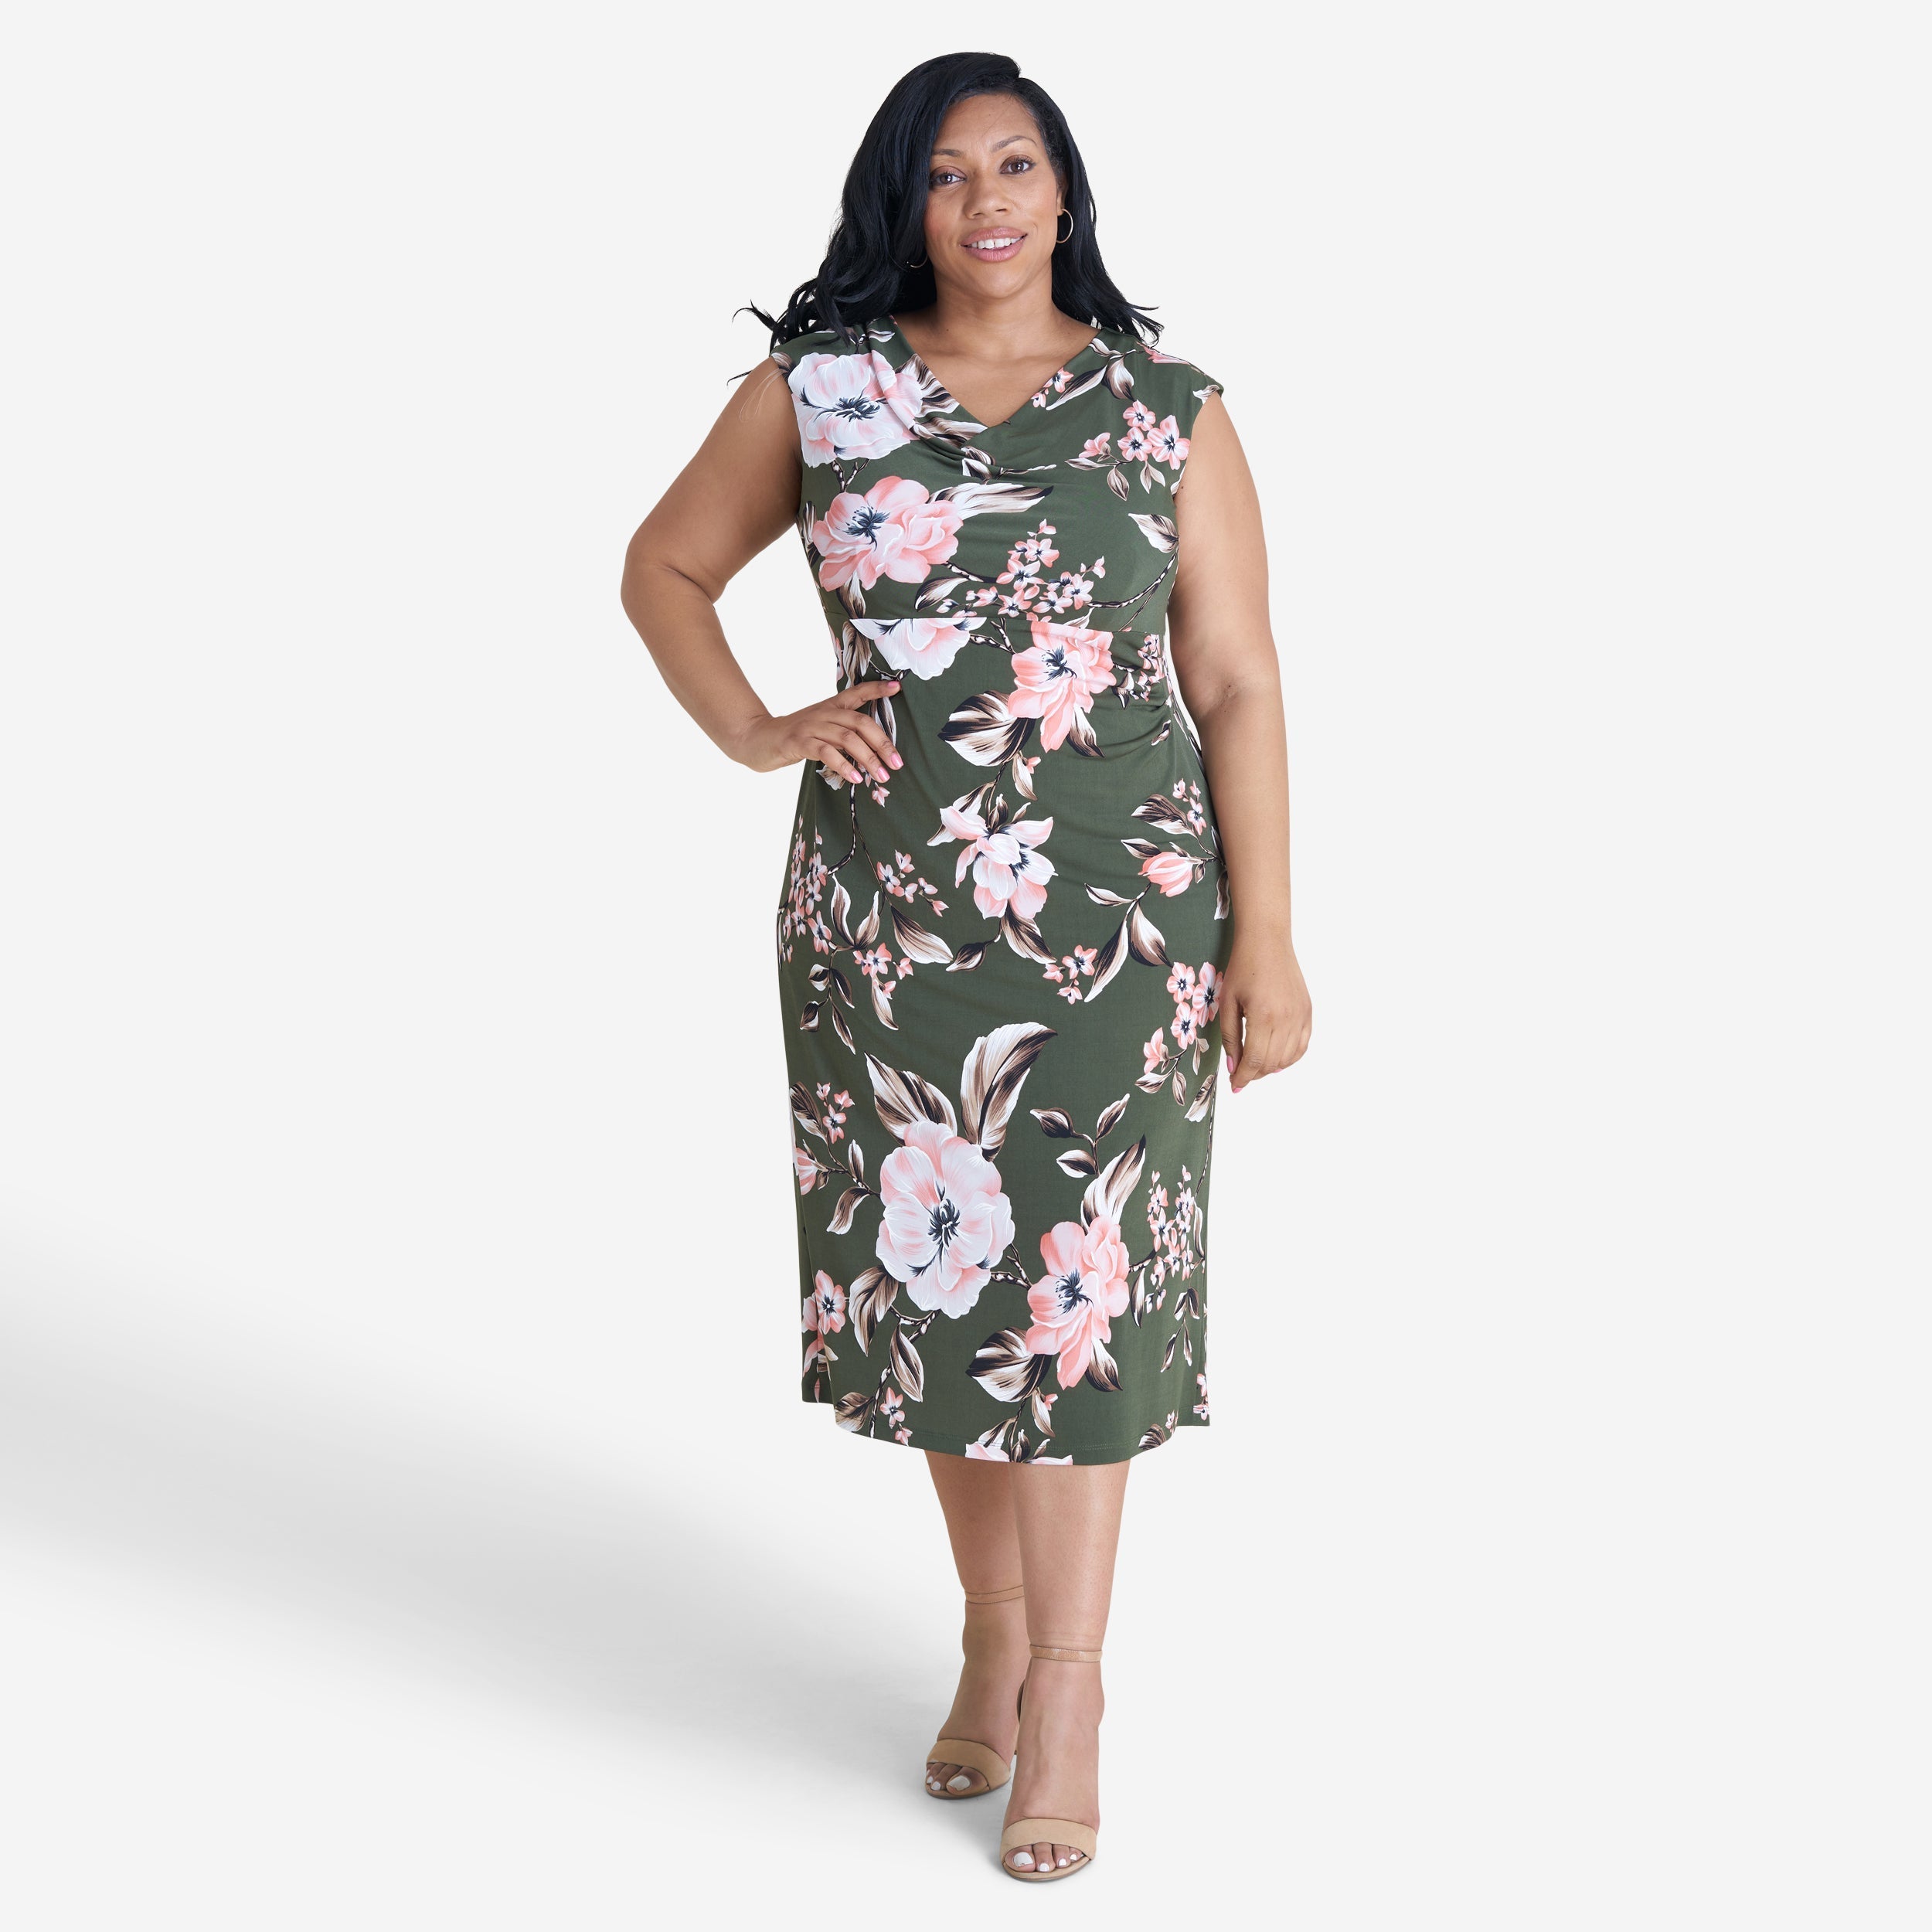 Woman posing wearing Olive Tonya Olive Floral Cowl Neck Midi Dress from Connected Apparel